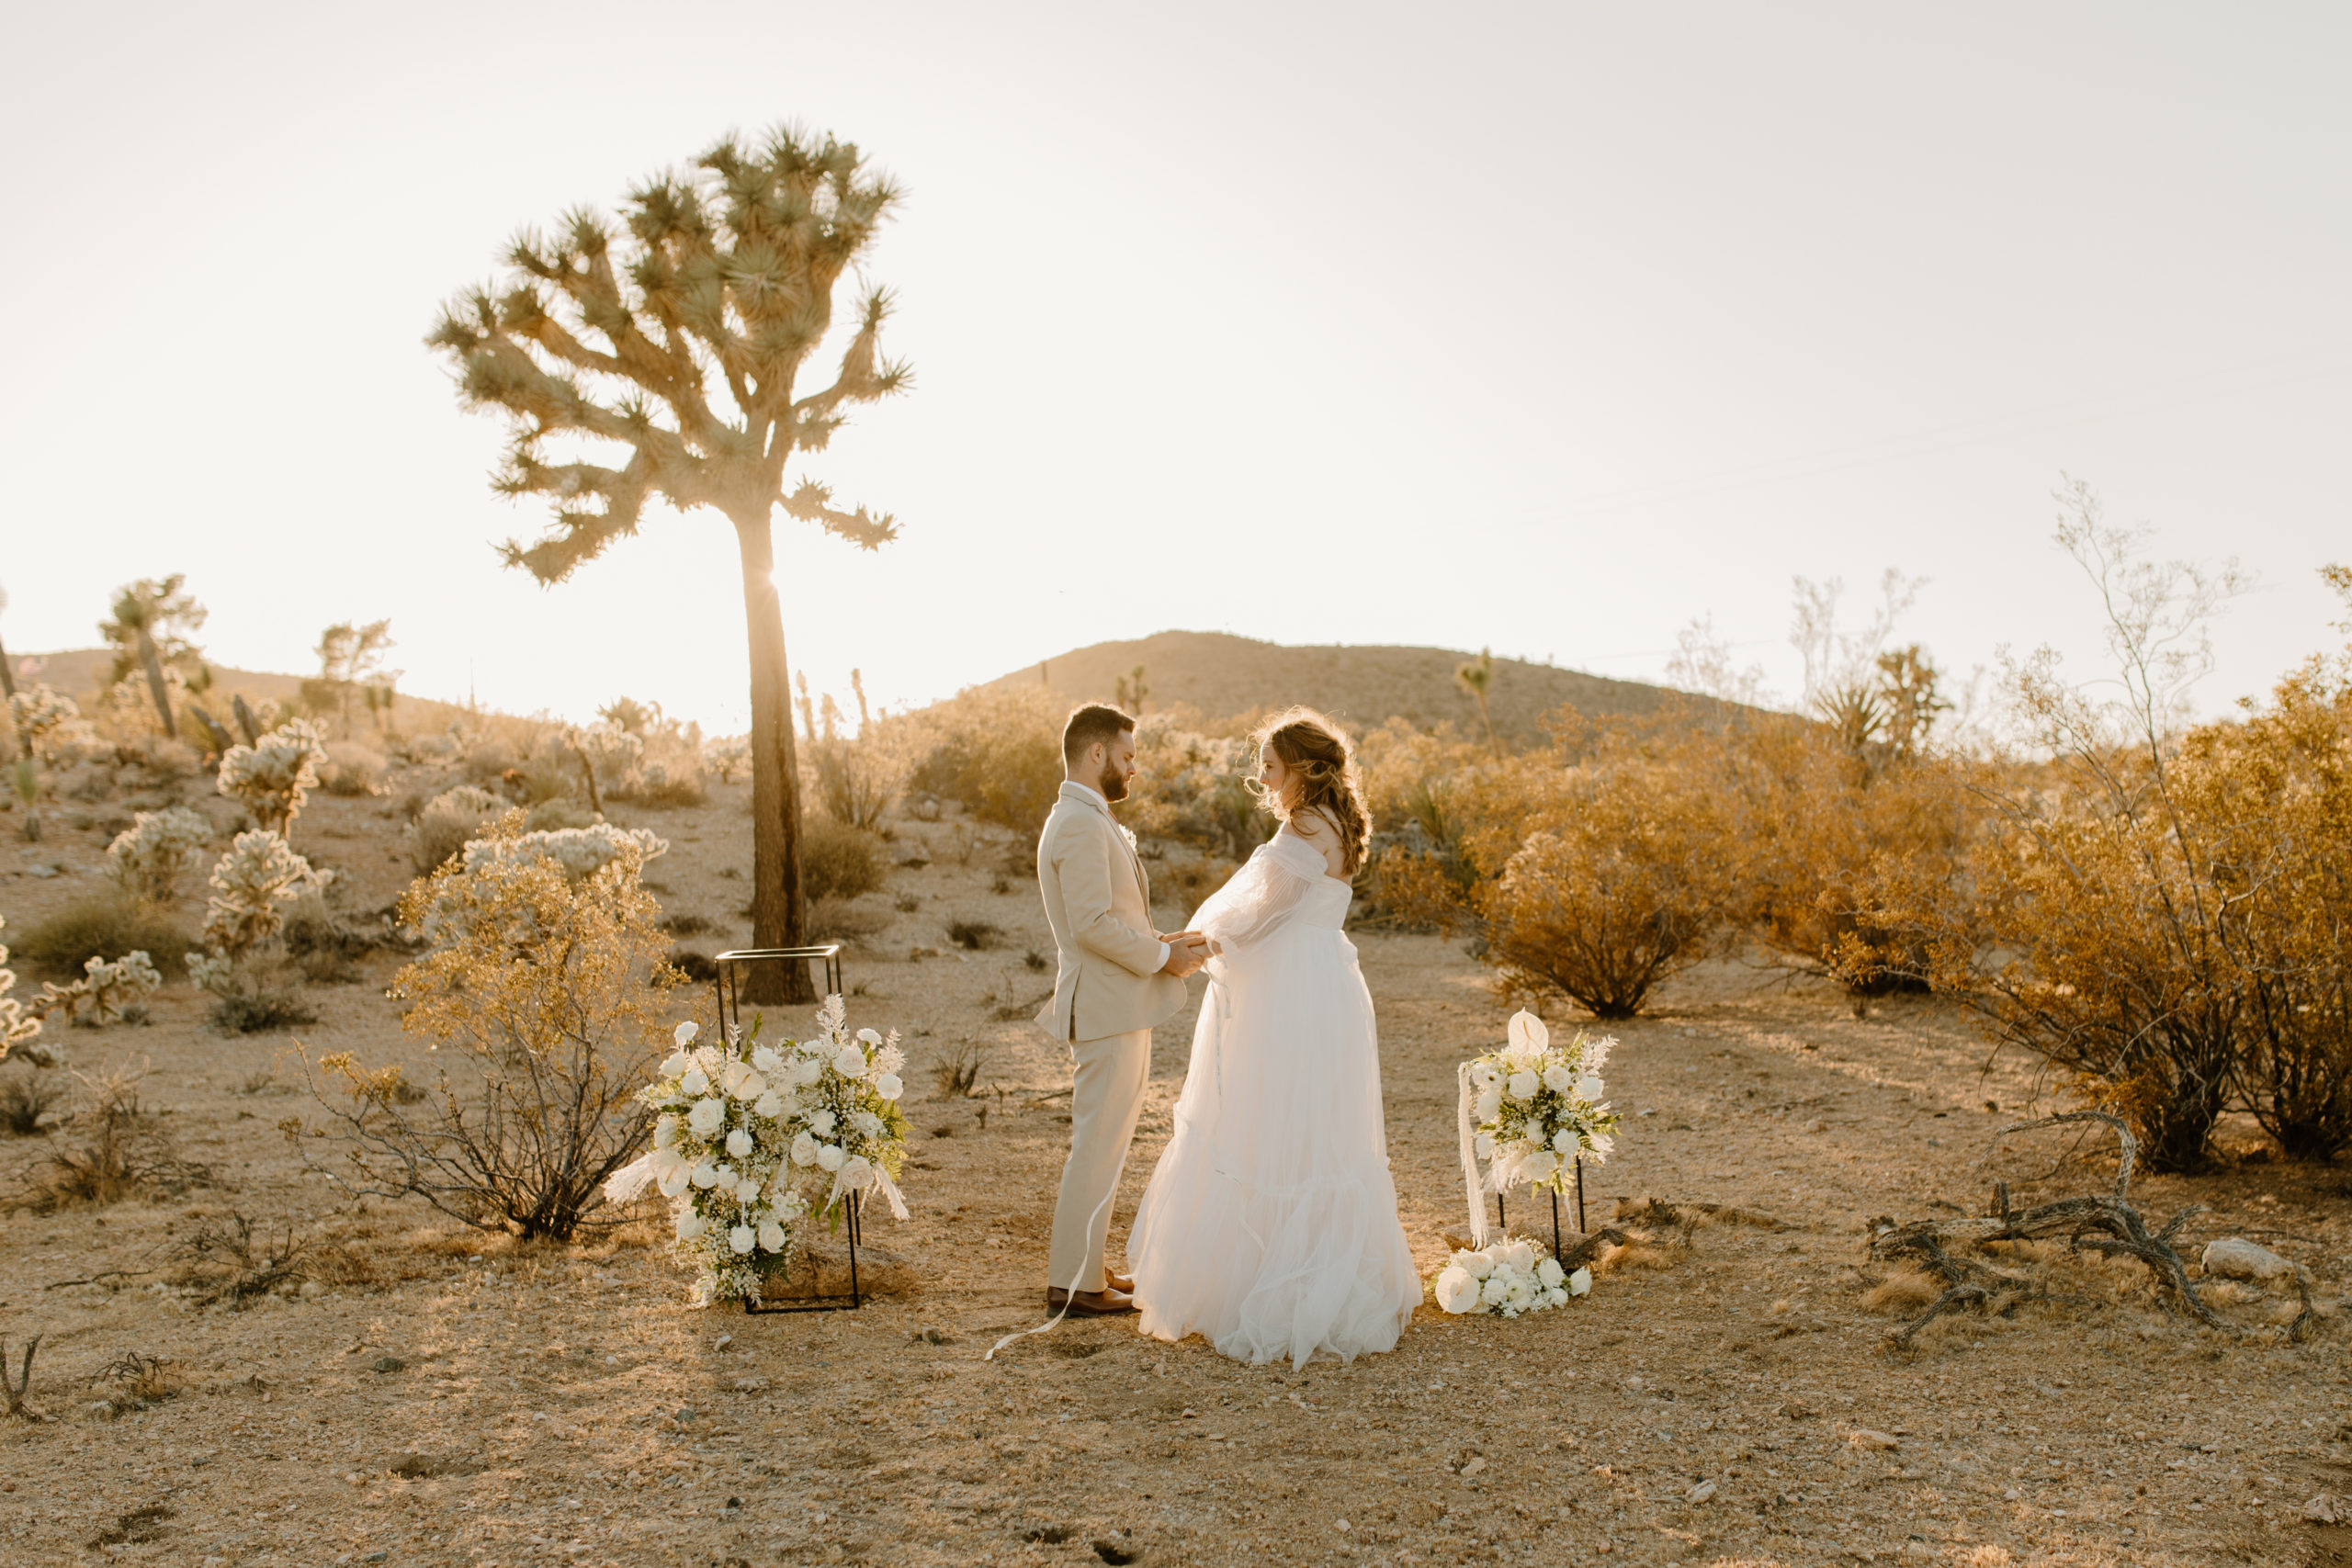 Joshua Tree National Park Elopement at an Airbnb